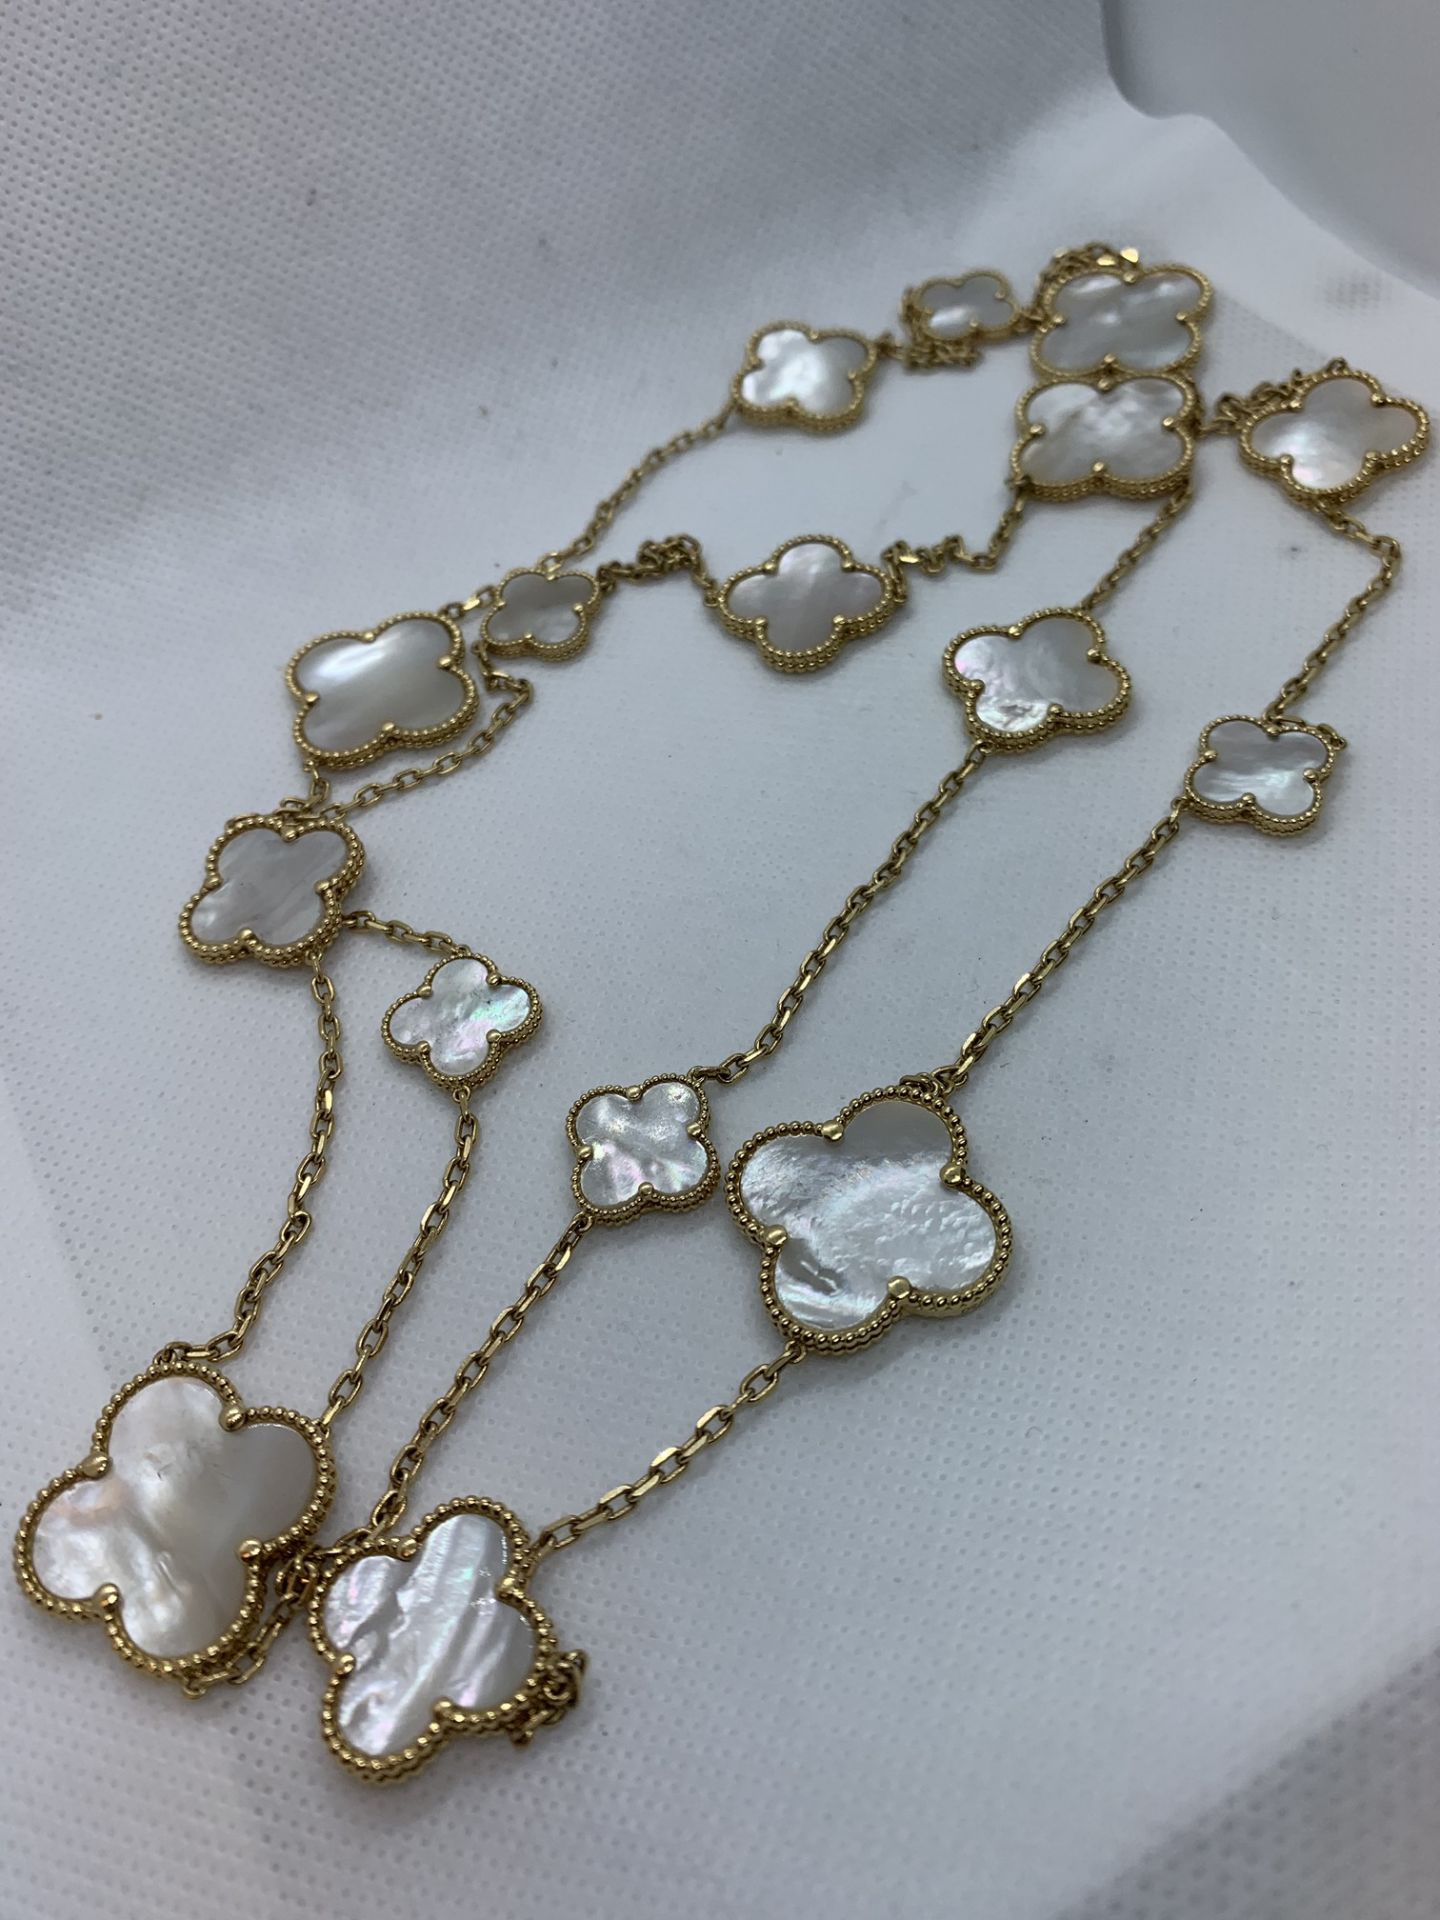 18ct GOLD MOTHER OF PEARL NECKLACE APPROX 40" - VAN CLEEF STYLE - Image 4 of 6